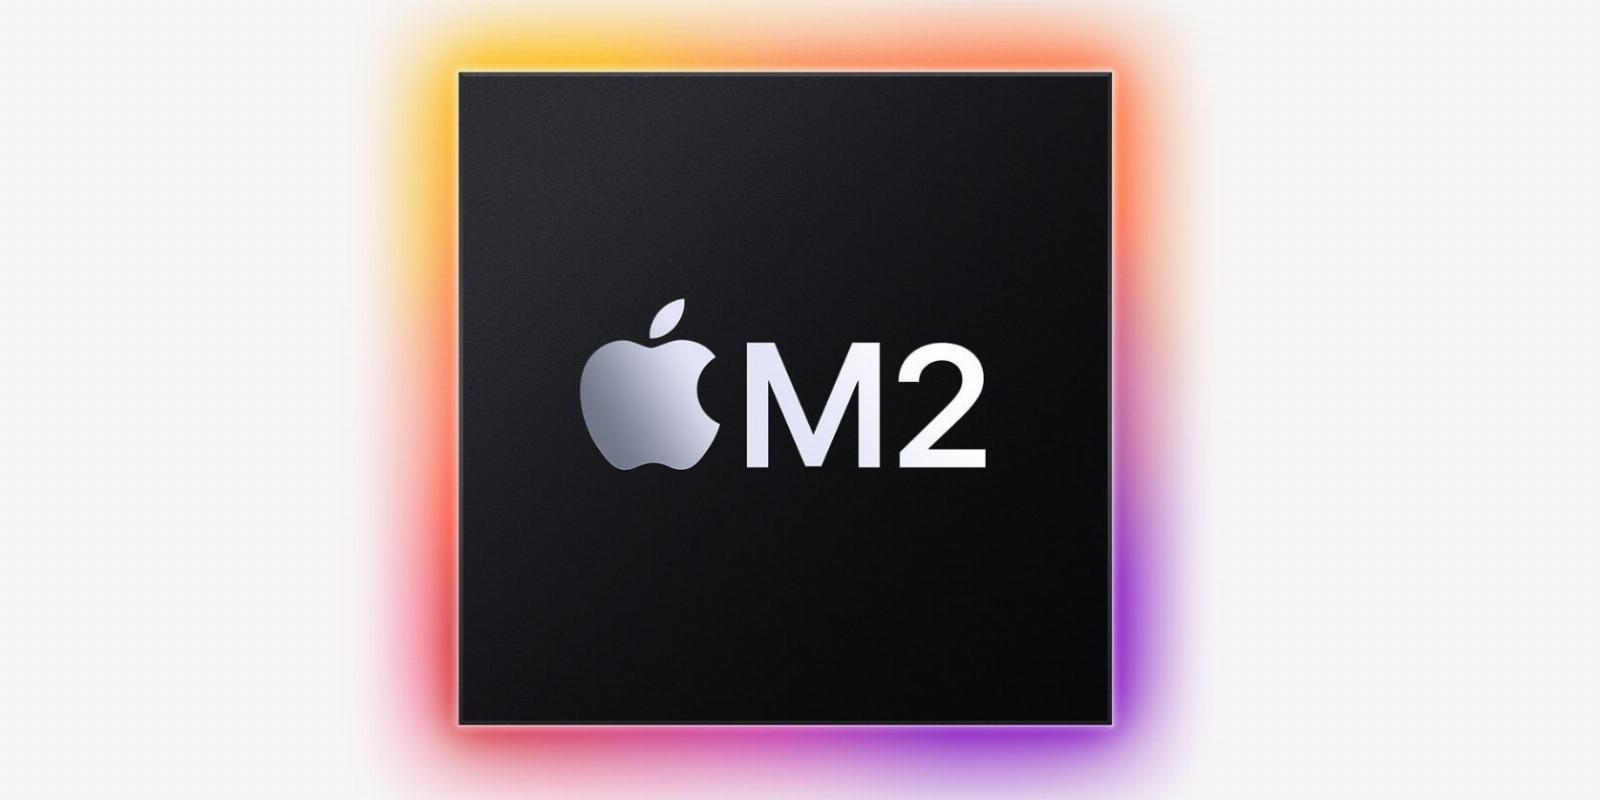 How Does the M2 Chip Compare to the M1, M1 Pro, M1 Max, or M1 Ultra?